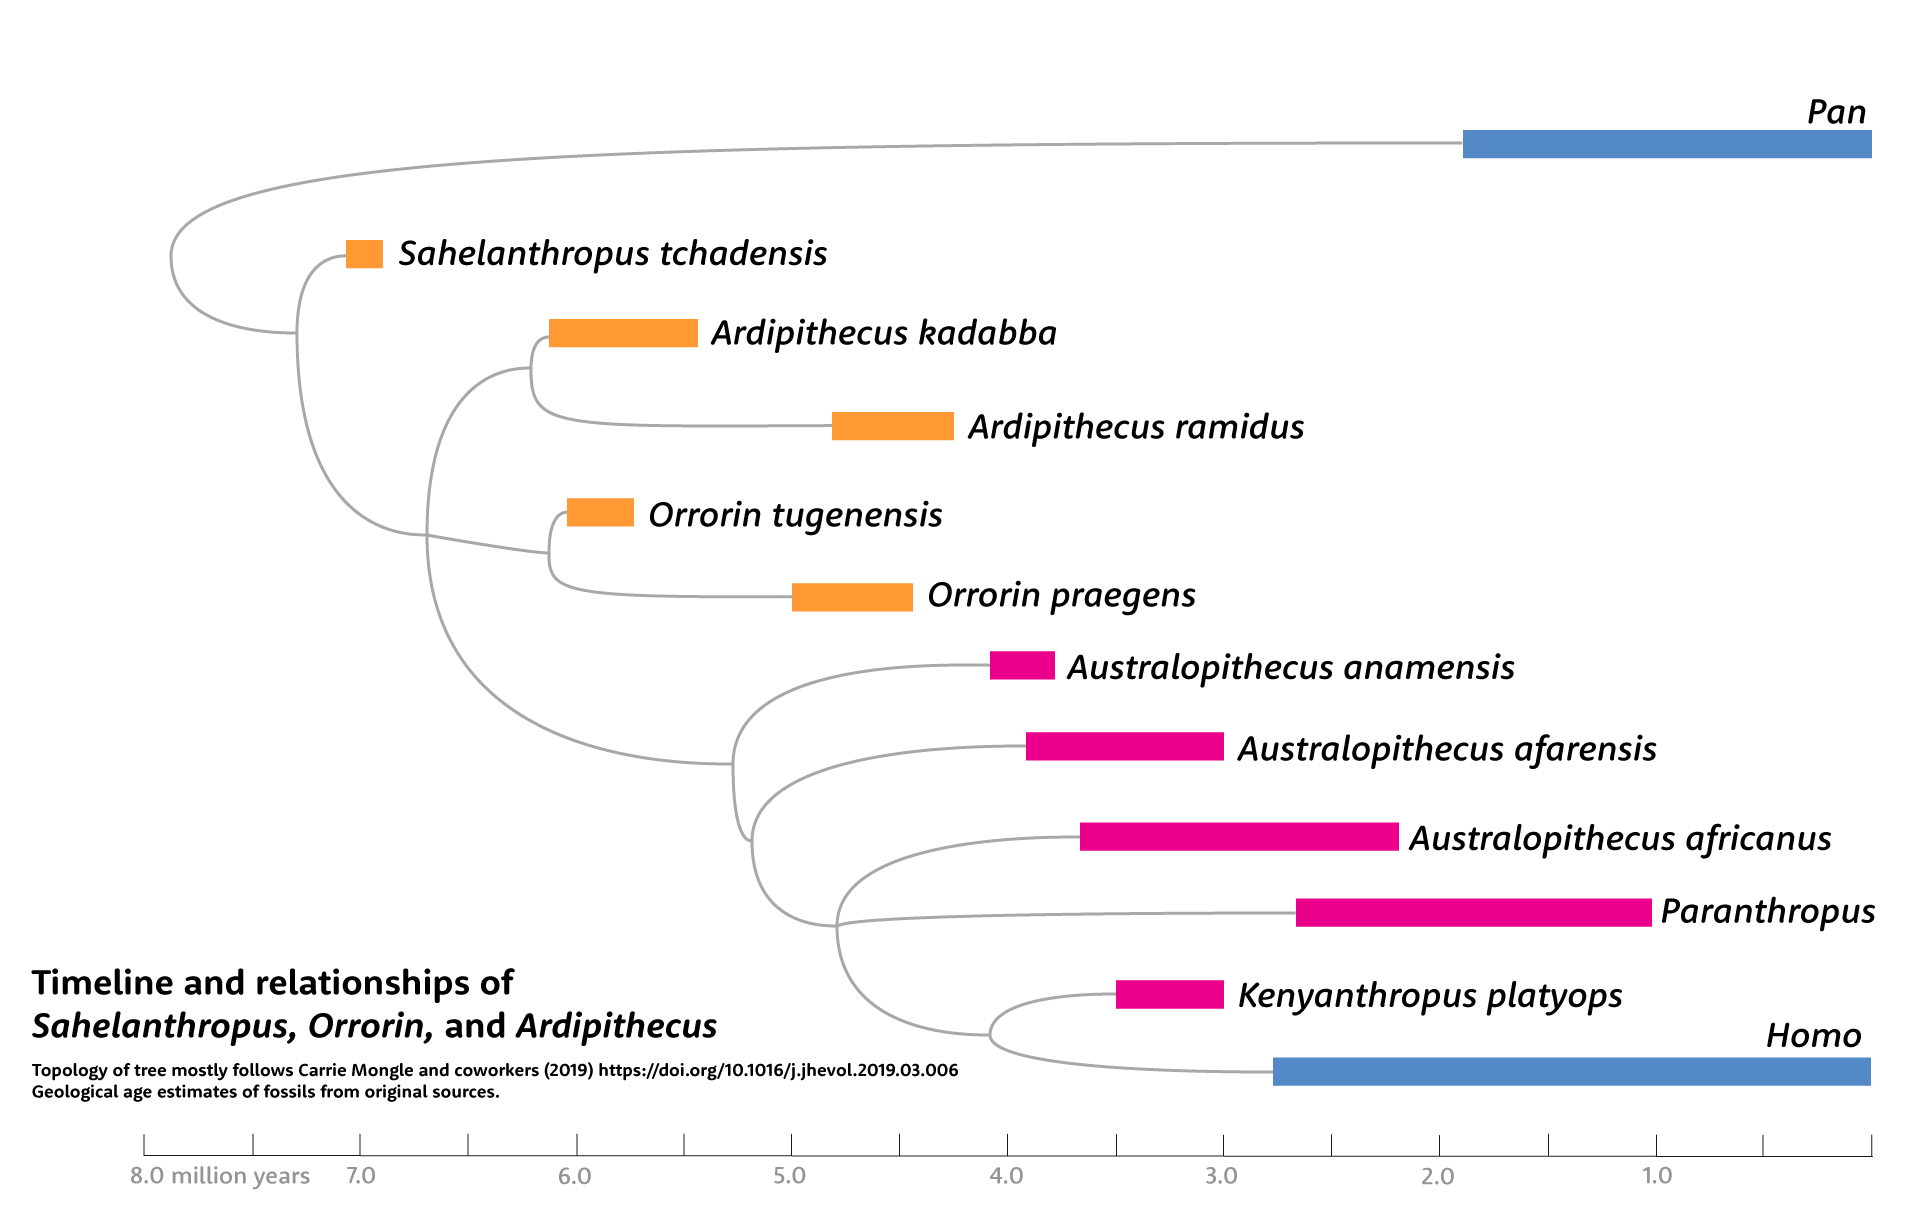 Timeline and relationships of Sahelanthropus, Orrorin, and Ardipithecus